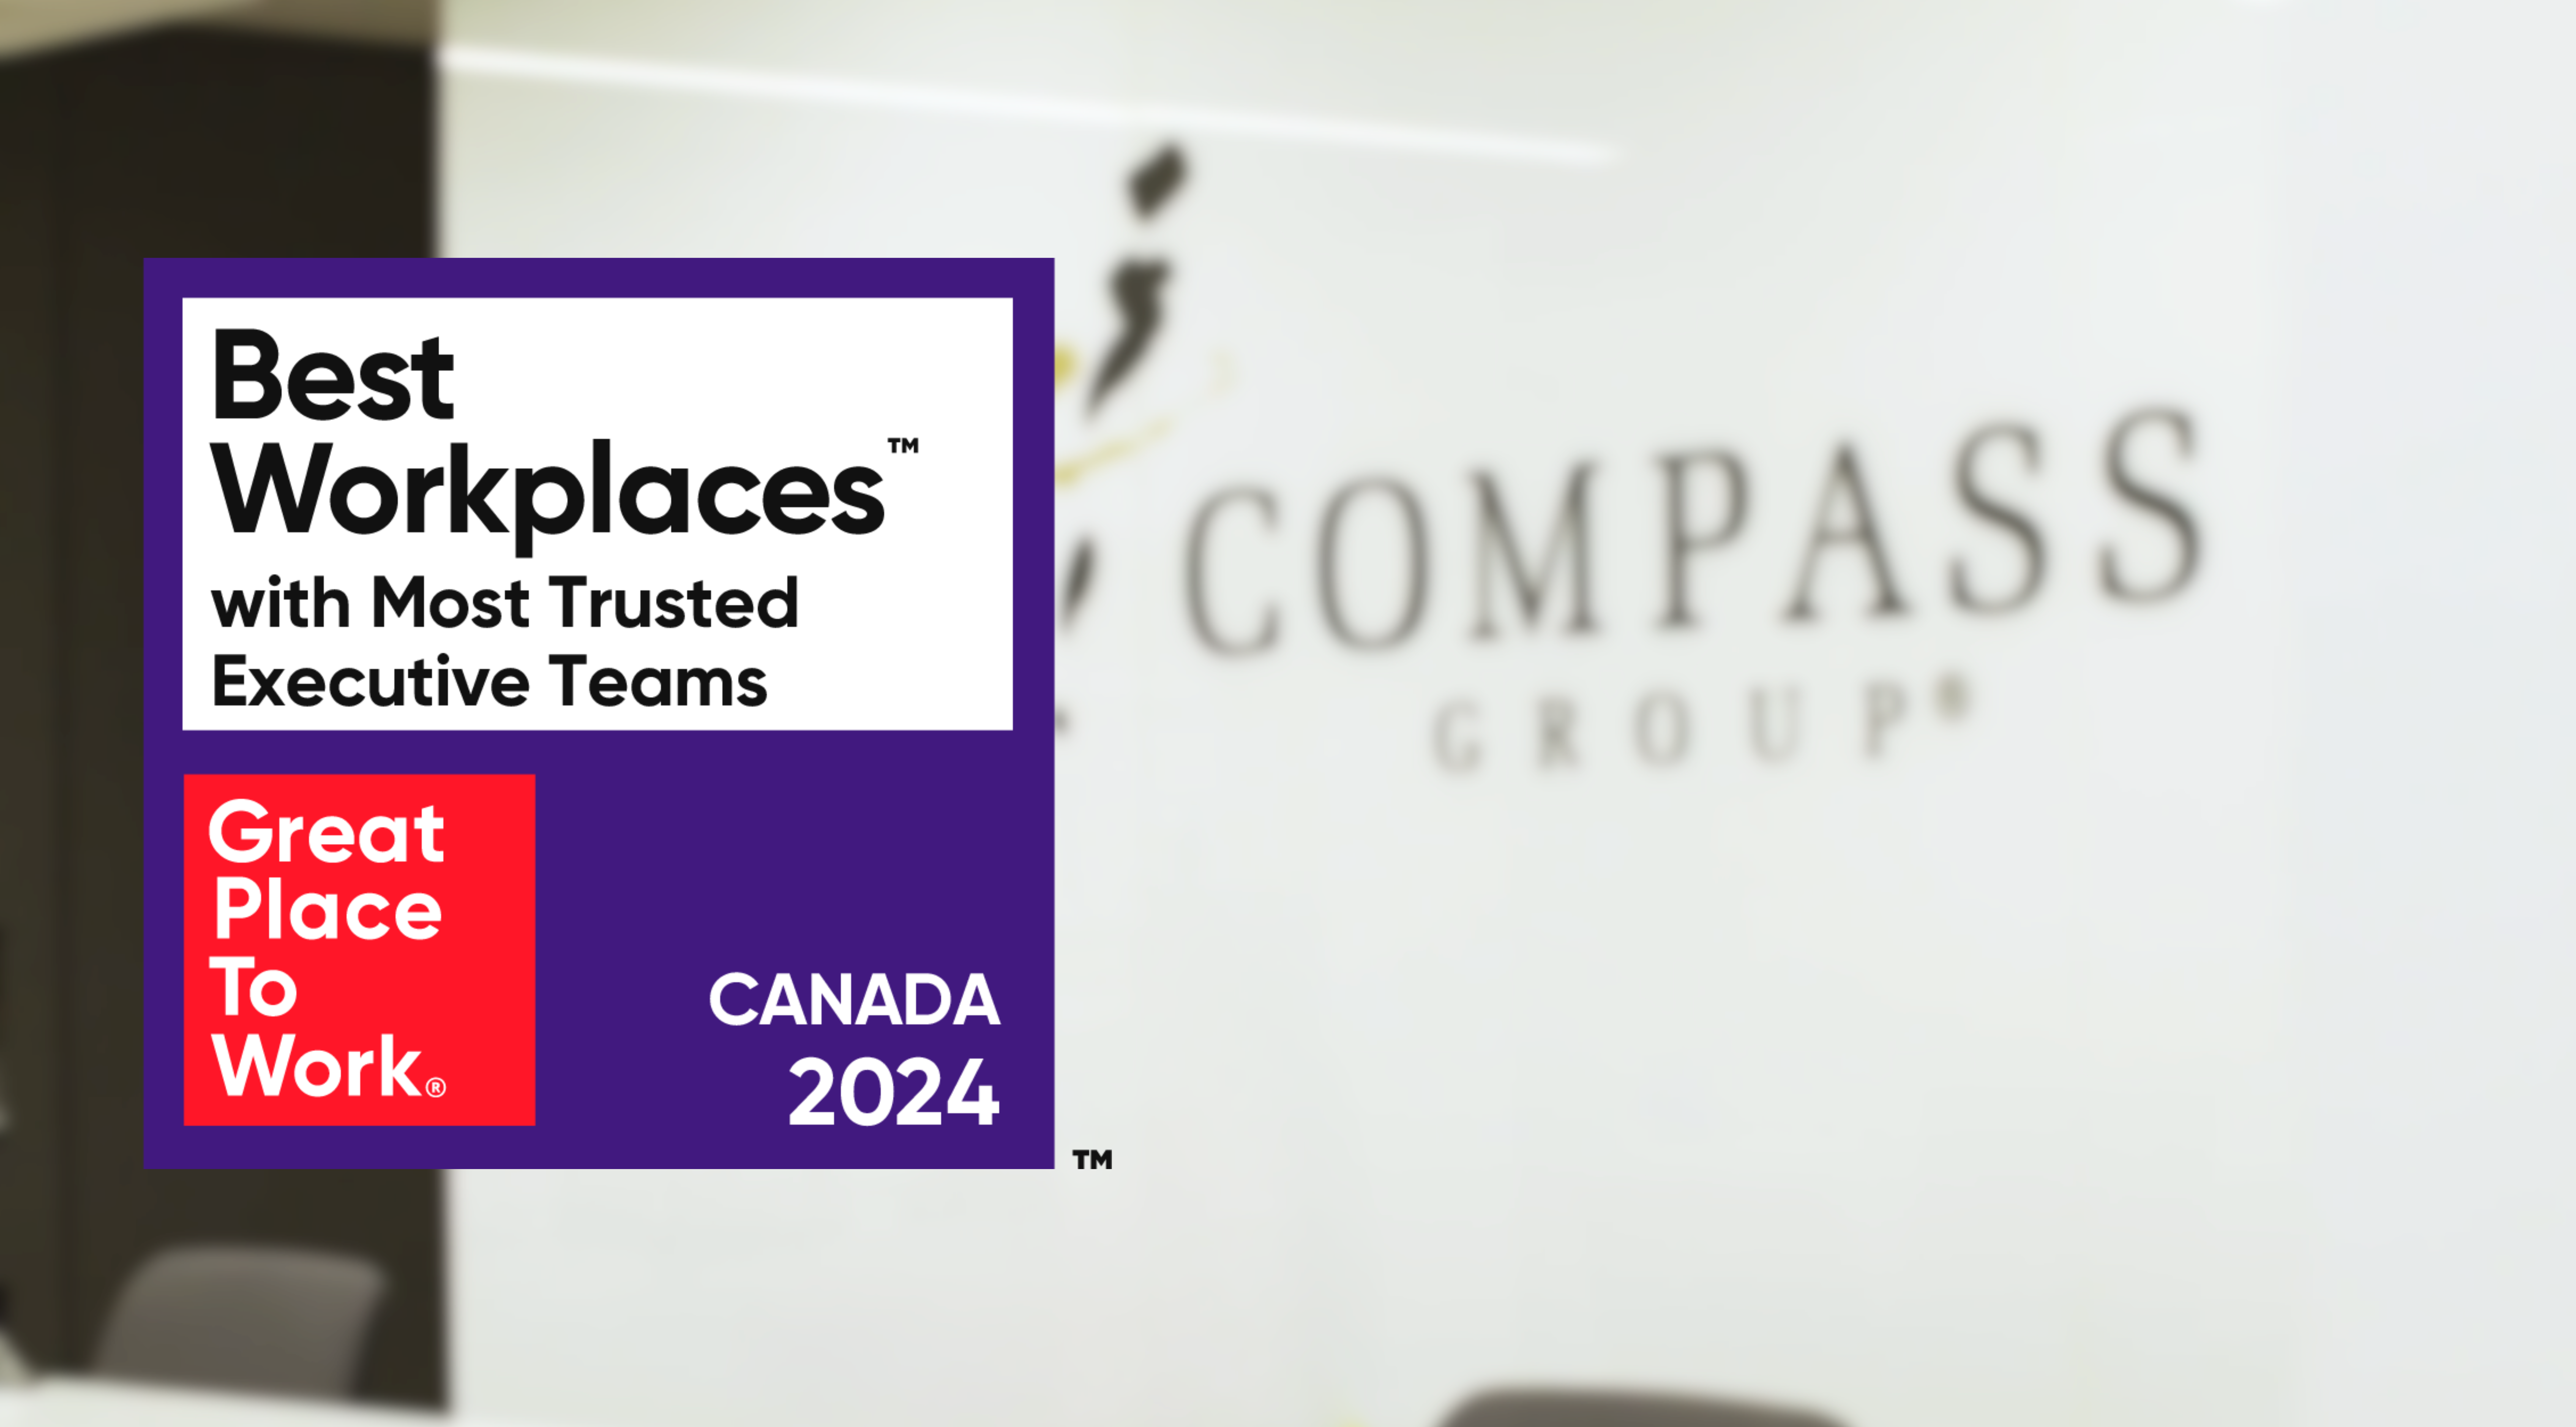 Compass Group Canada named to the Best Workplaces™ with Most Trusted Executive Teams list by Great Place to Work®